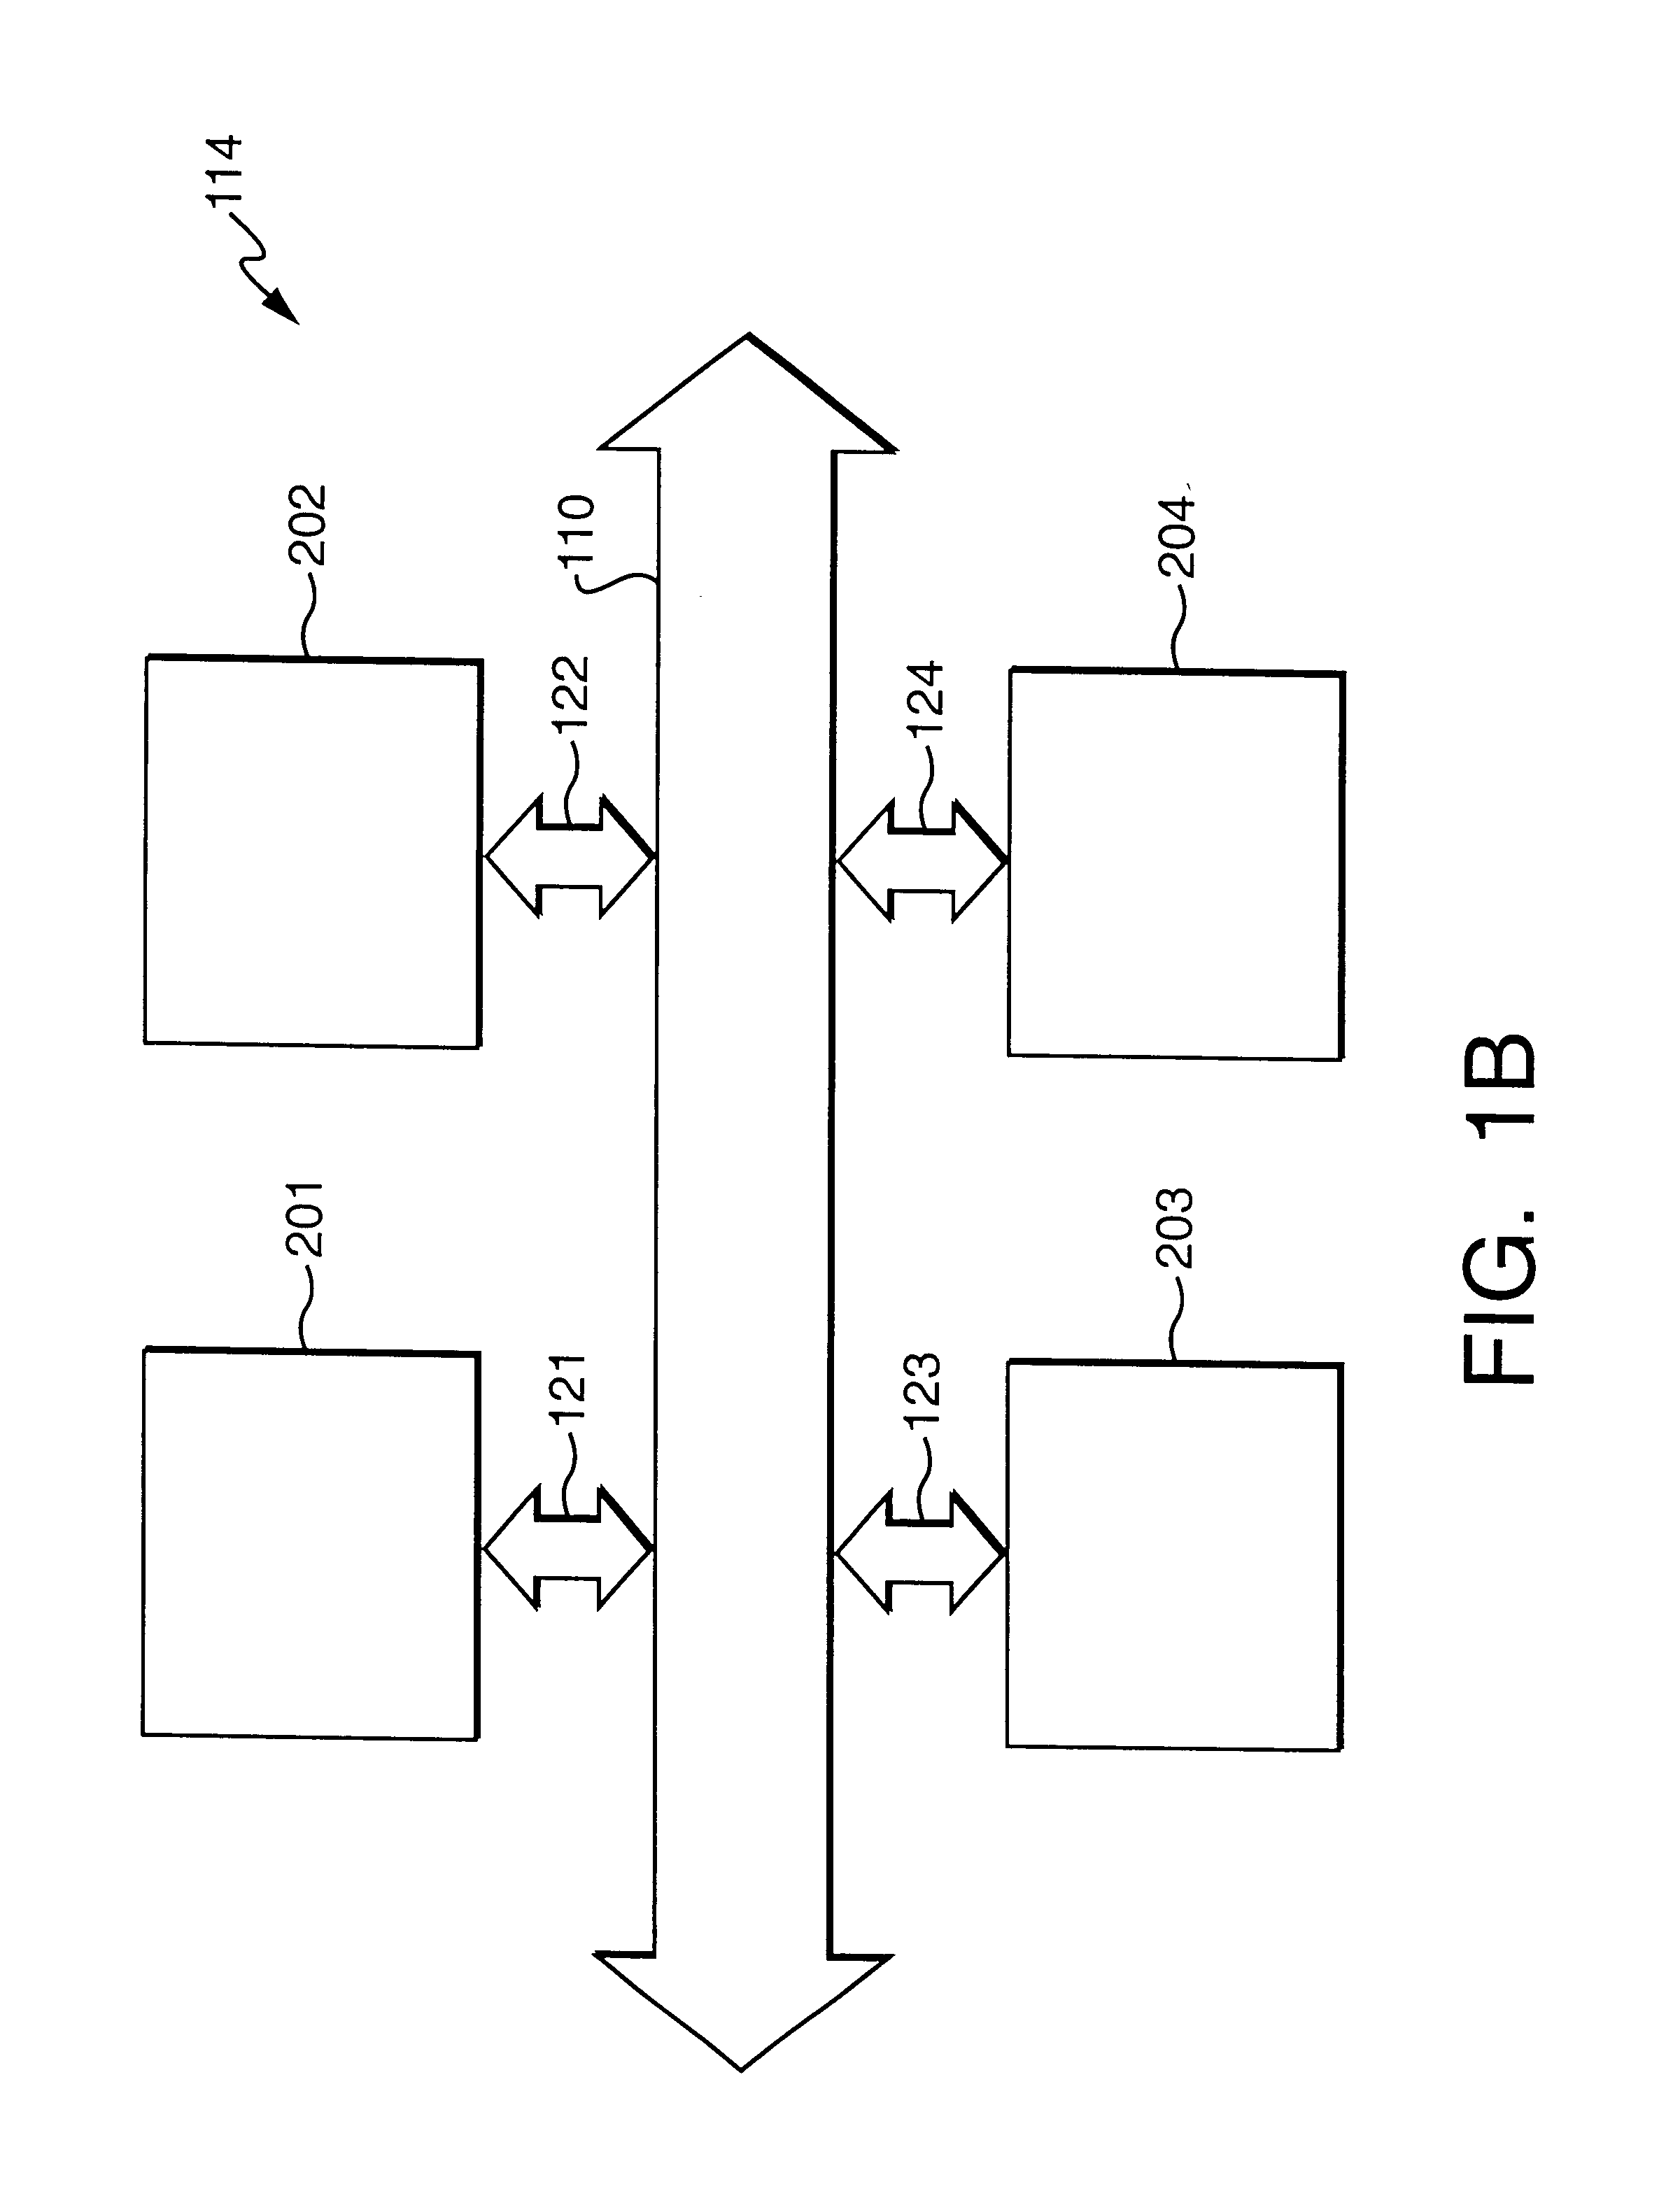 Method for resolving trouble in a connection having a plurality of components